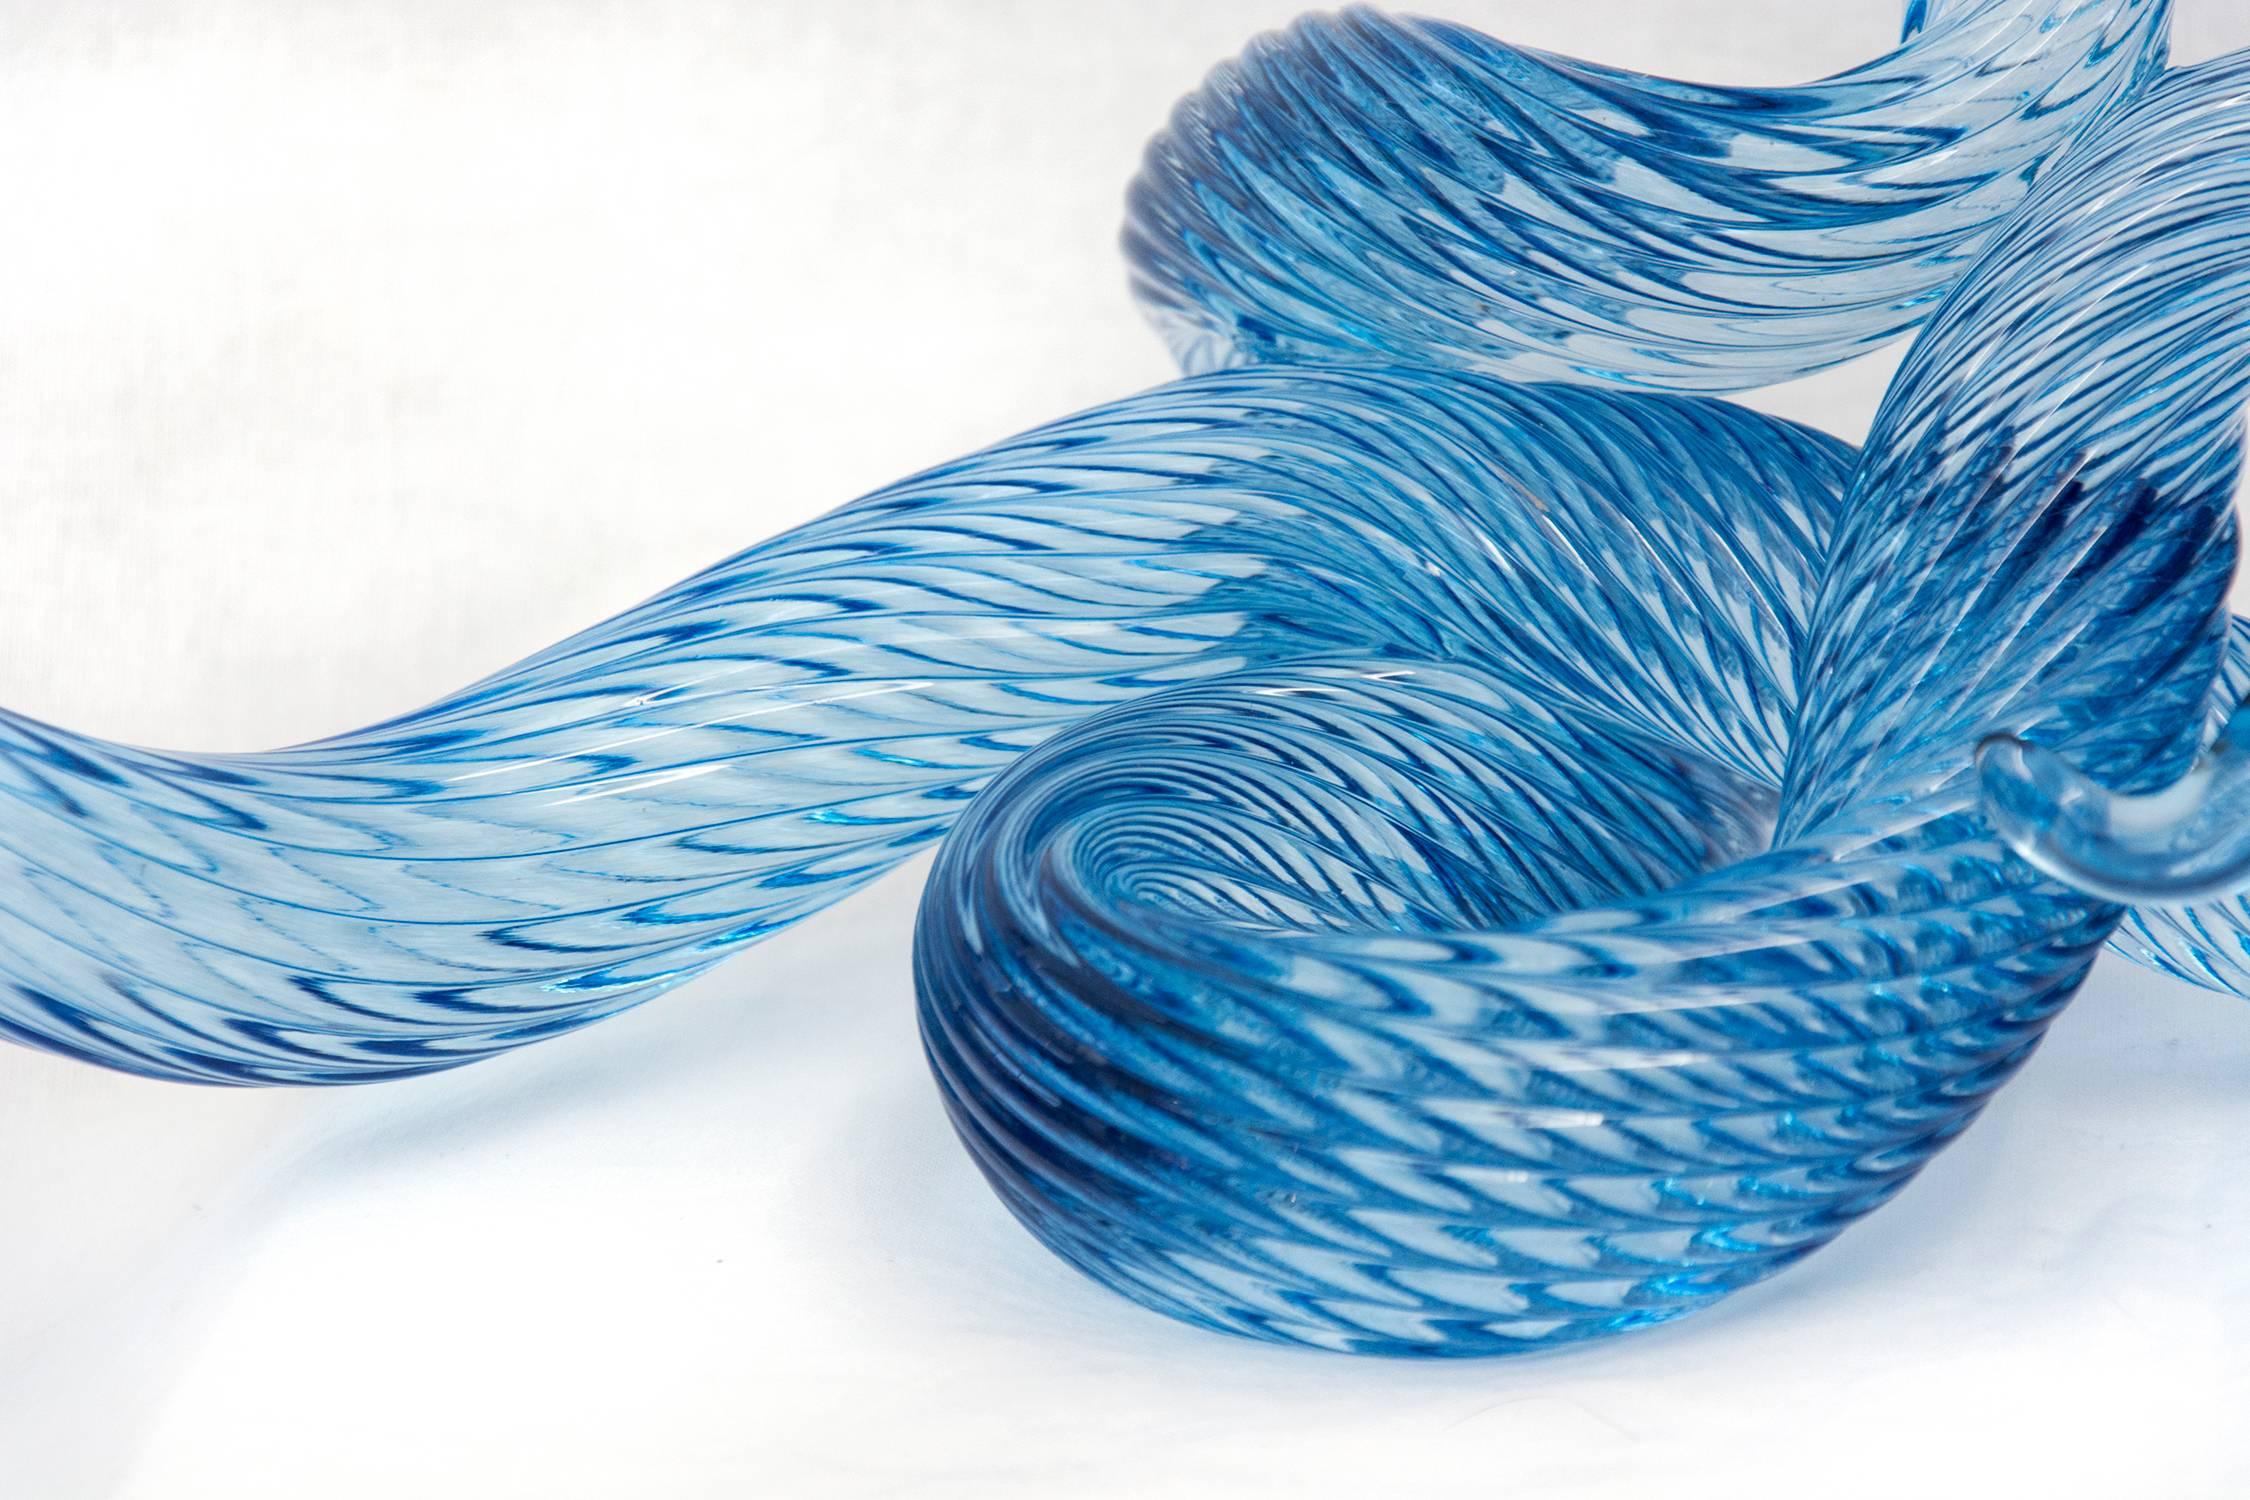 Three rods of translucent and striated cerulean blue glass are twisted, looped and shaped into elegant waves by artist John Paul Robinson. The curated three part design is enhanced by light that sparkles on the complex surfaces of this table top